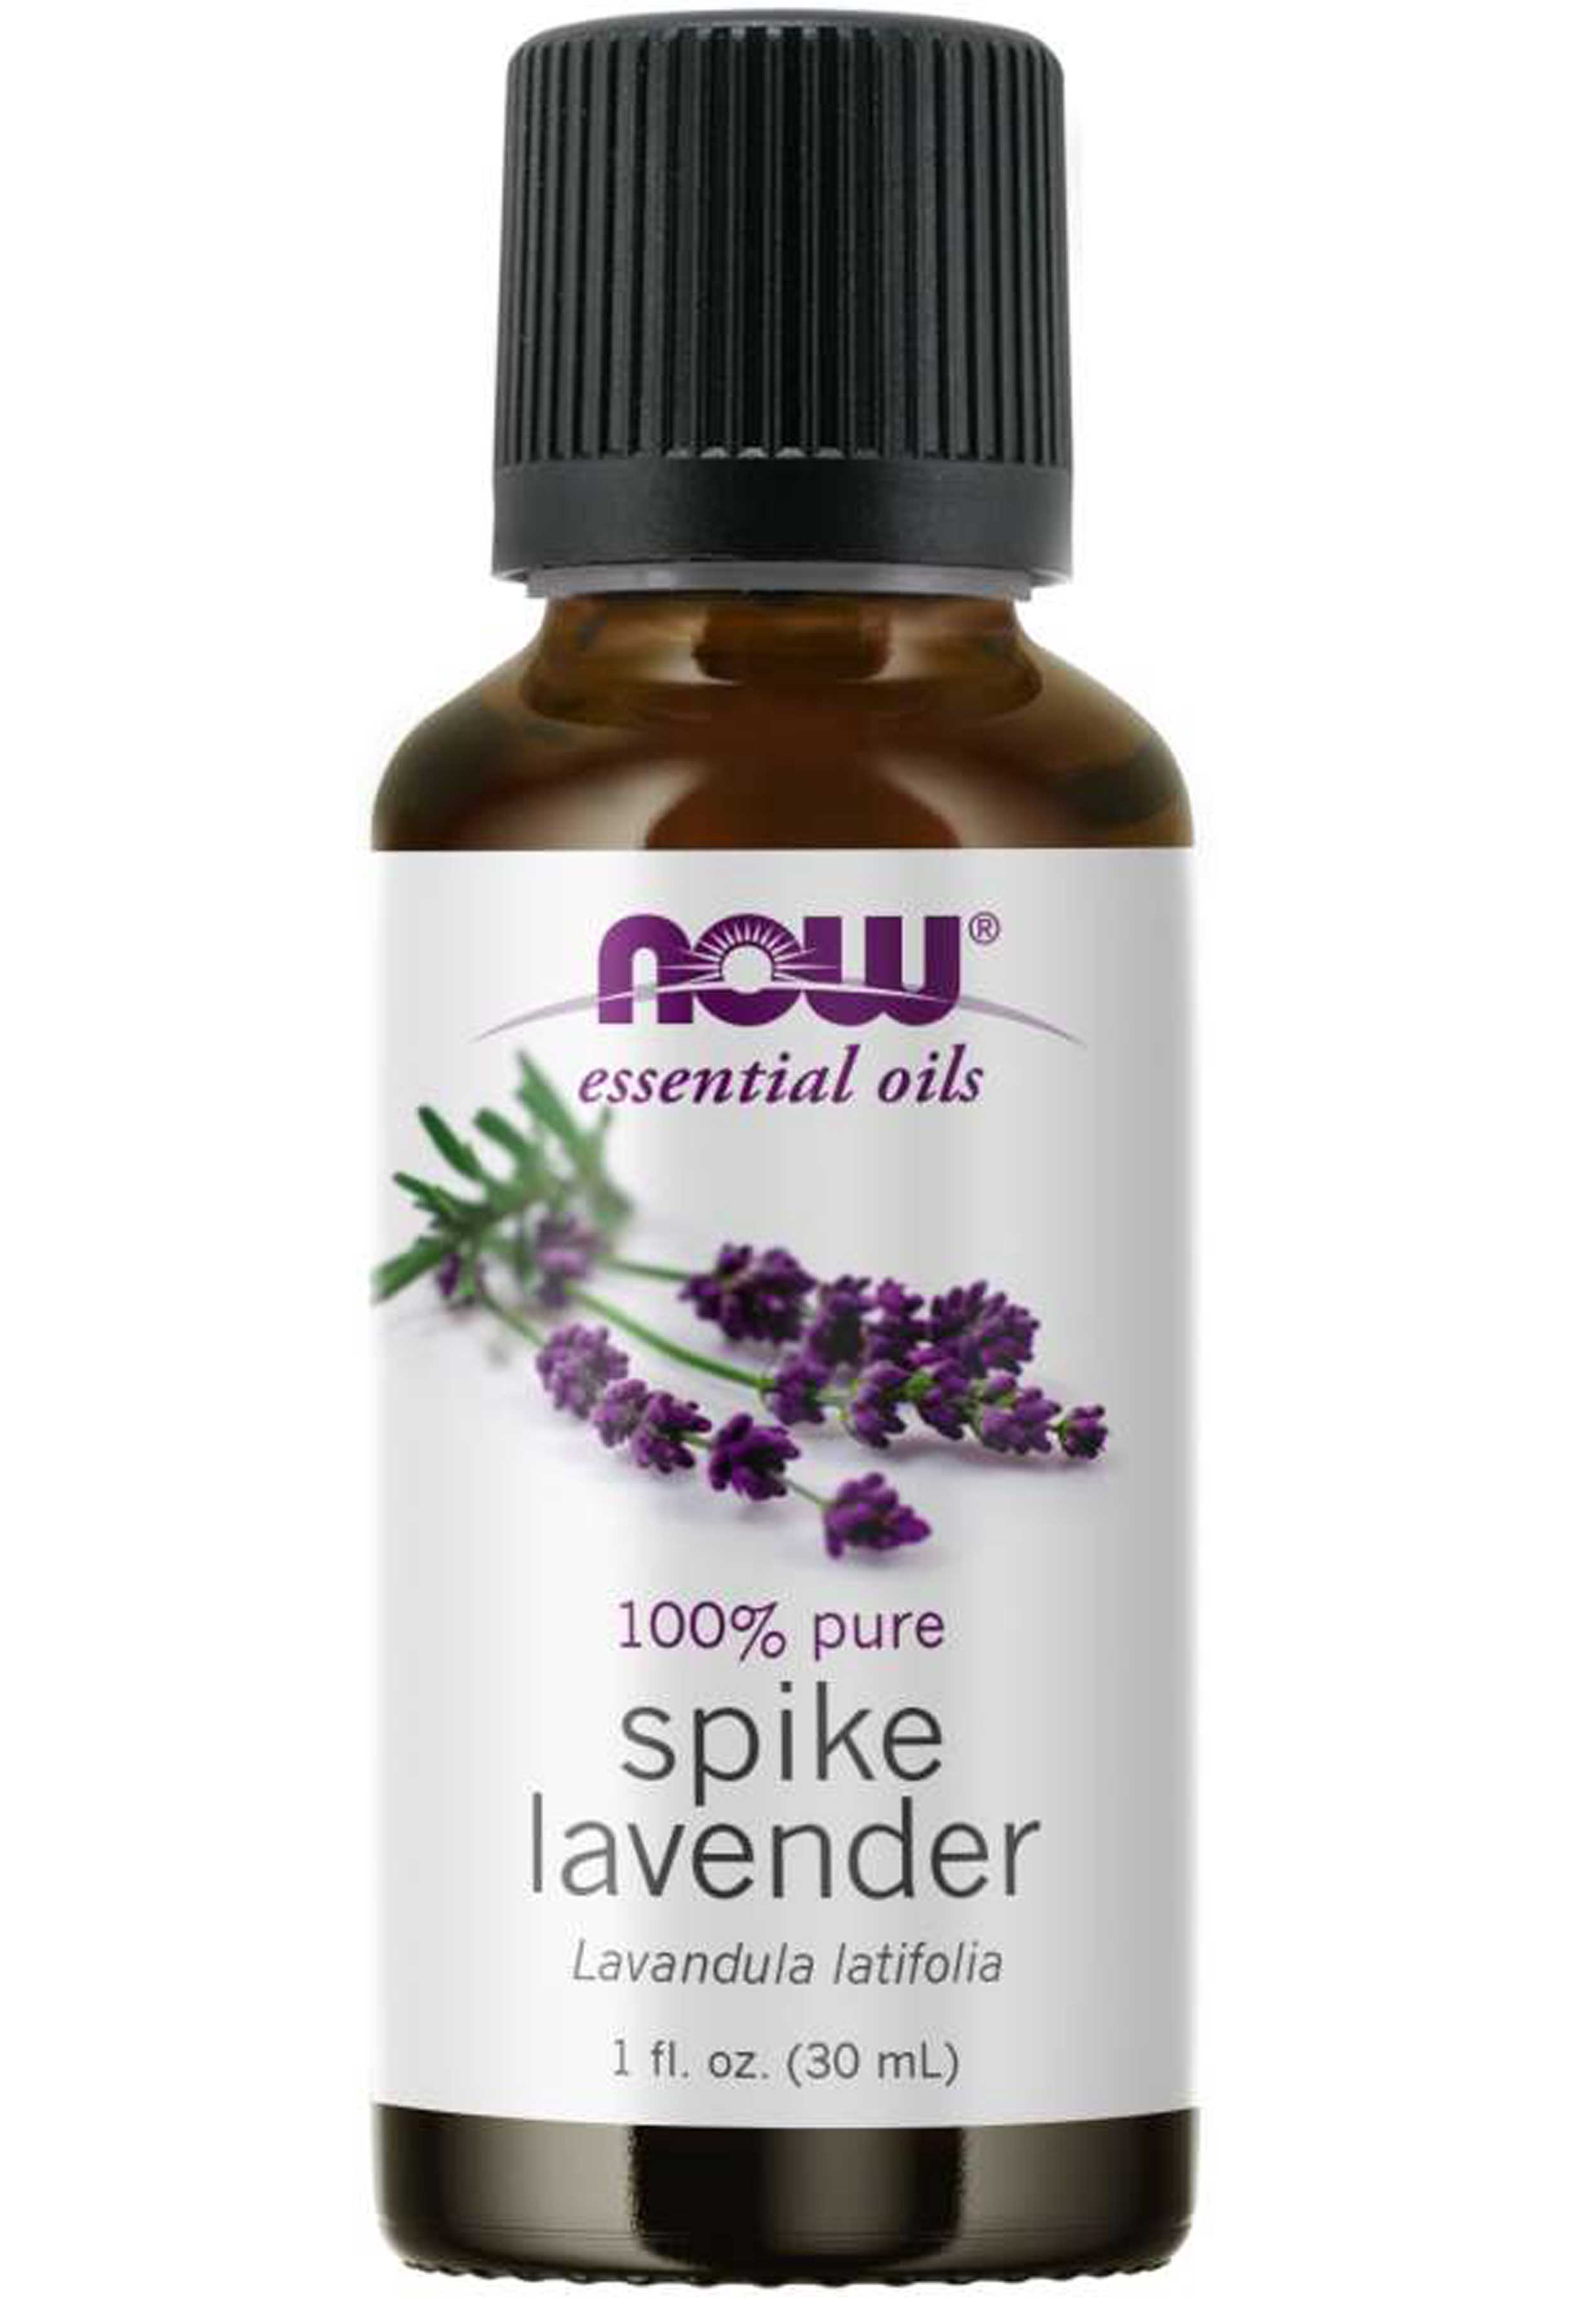 NOW Essential Oils Spike Lavender Oil